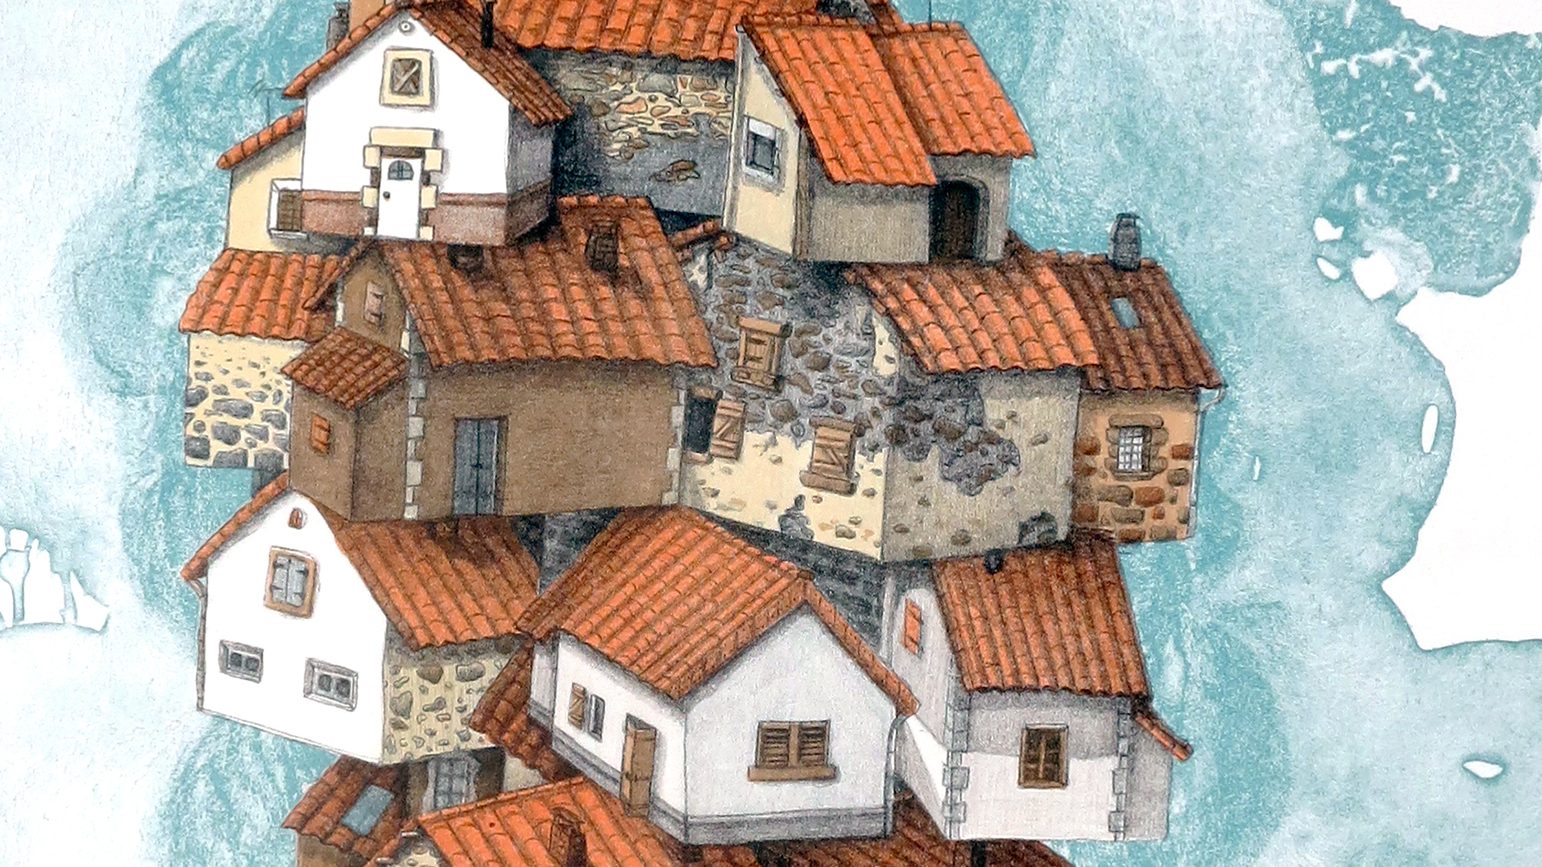 Detail of an artwork showing traditional cottage houses stacked on top one another